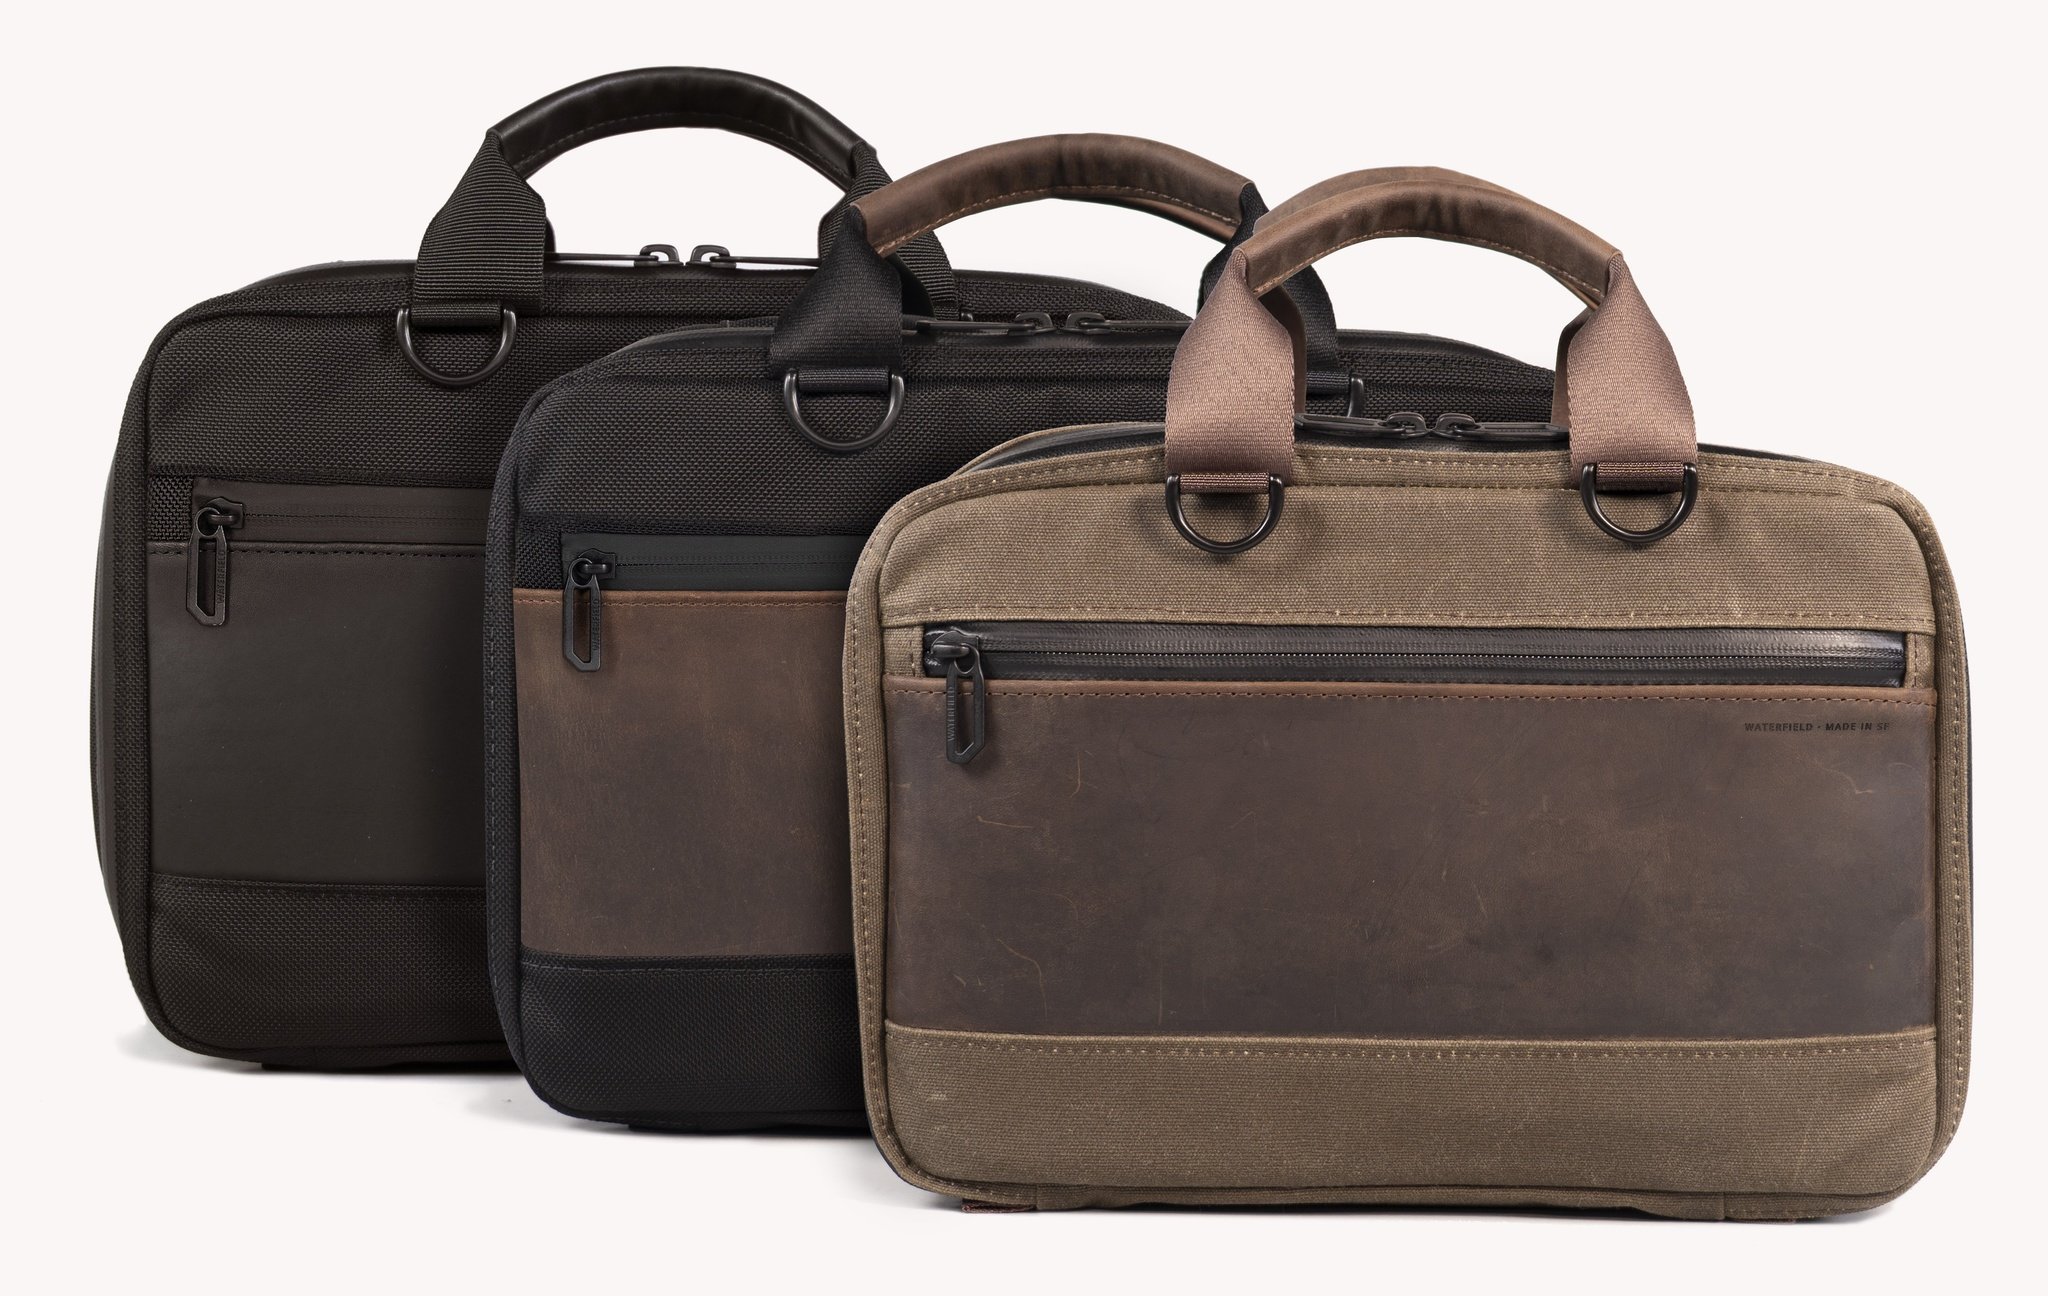 Take your Mac Studio to go with the new WaterField Designs Journey Bag